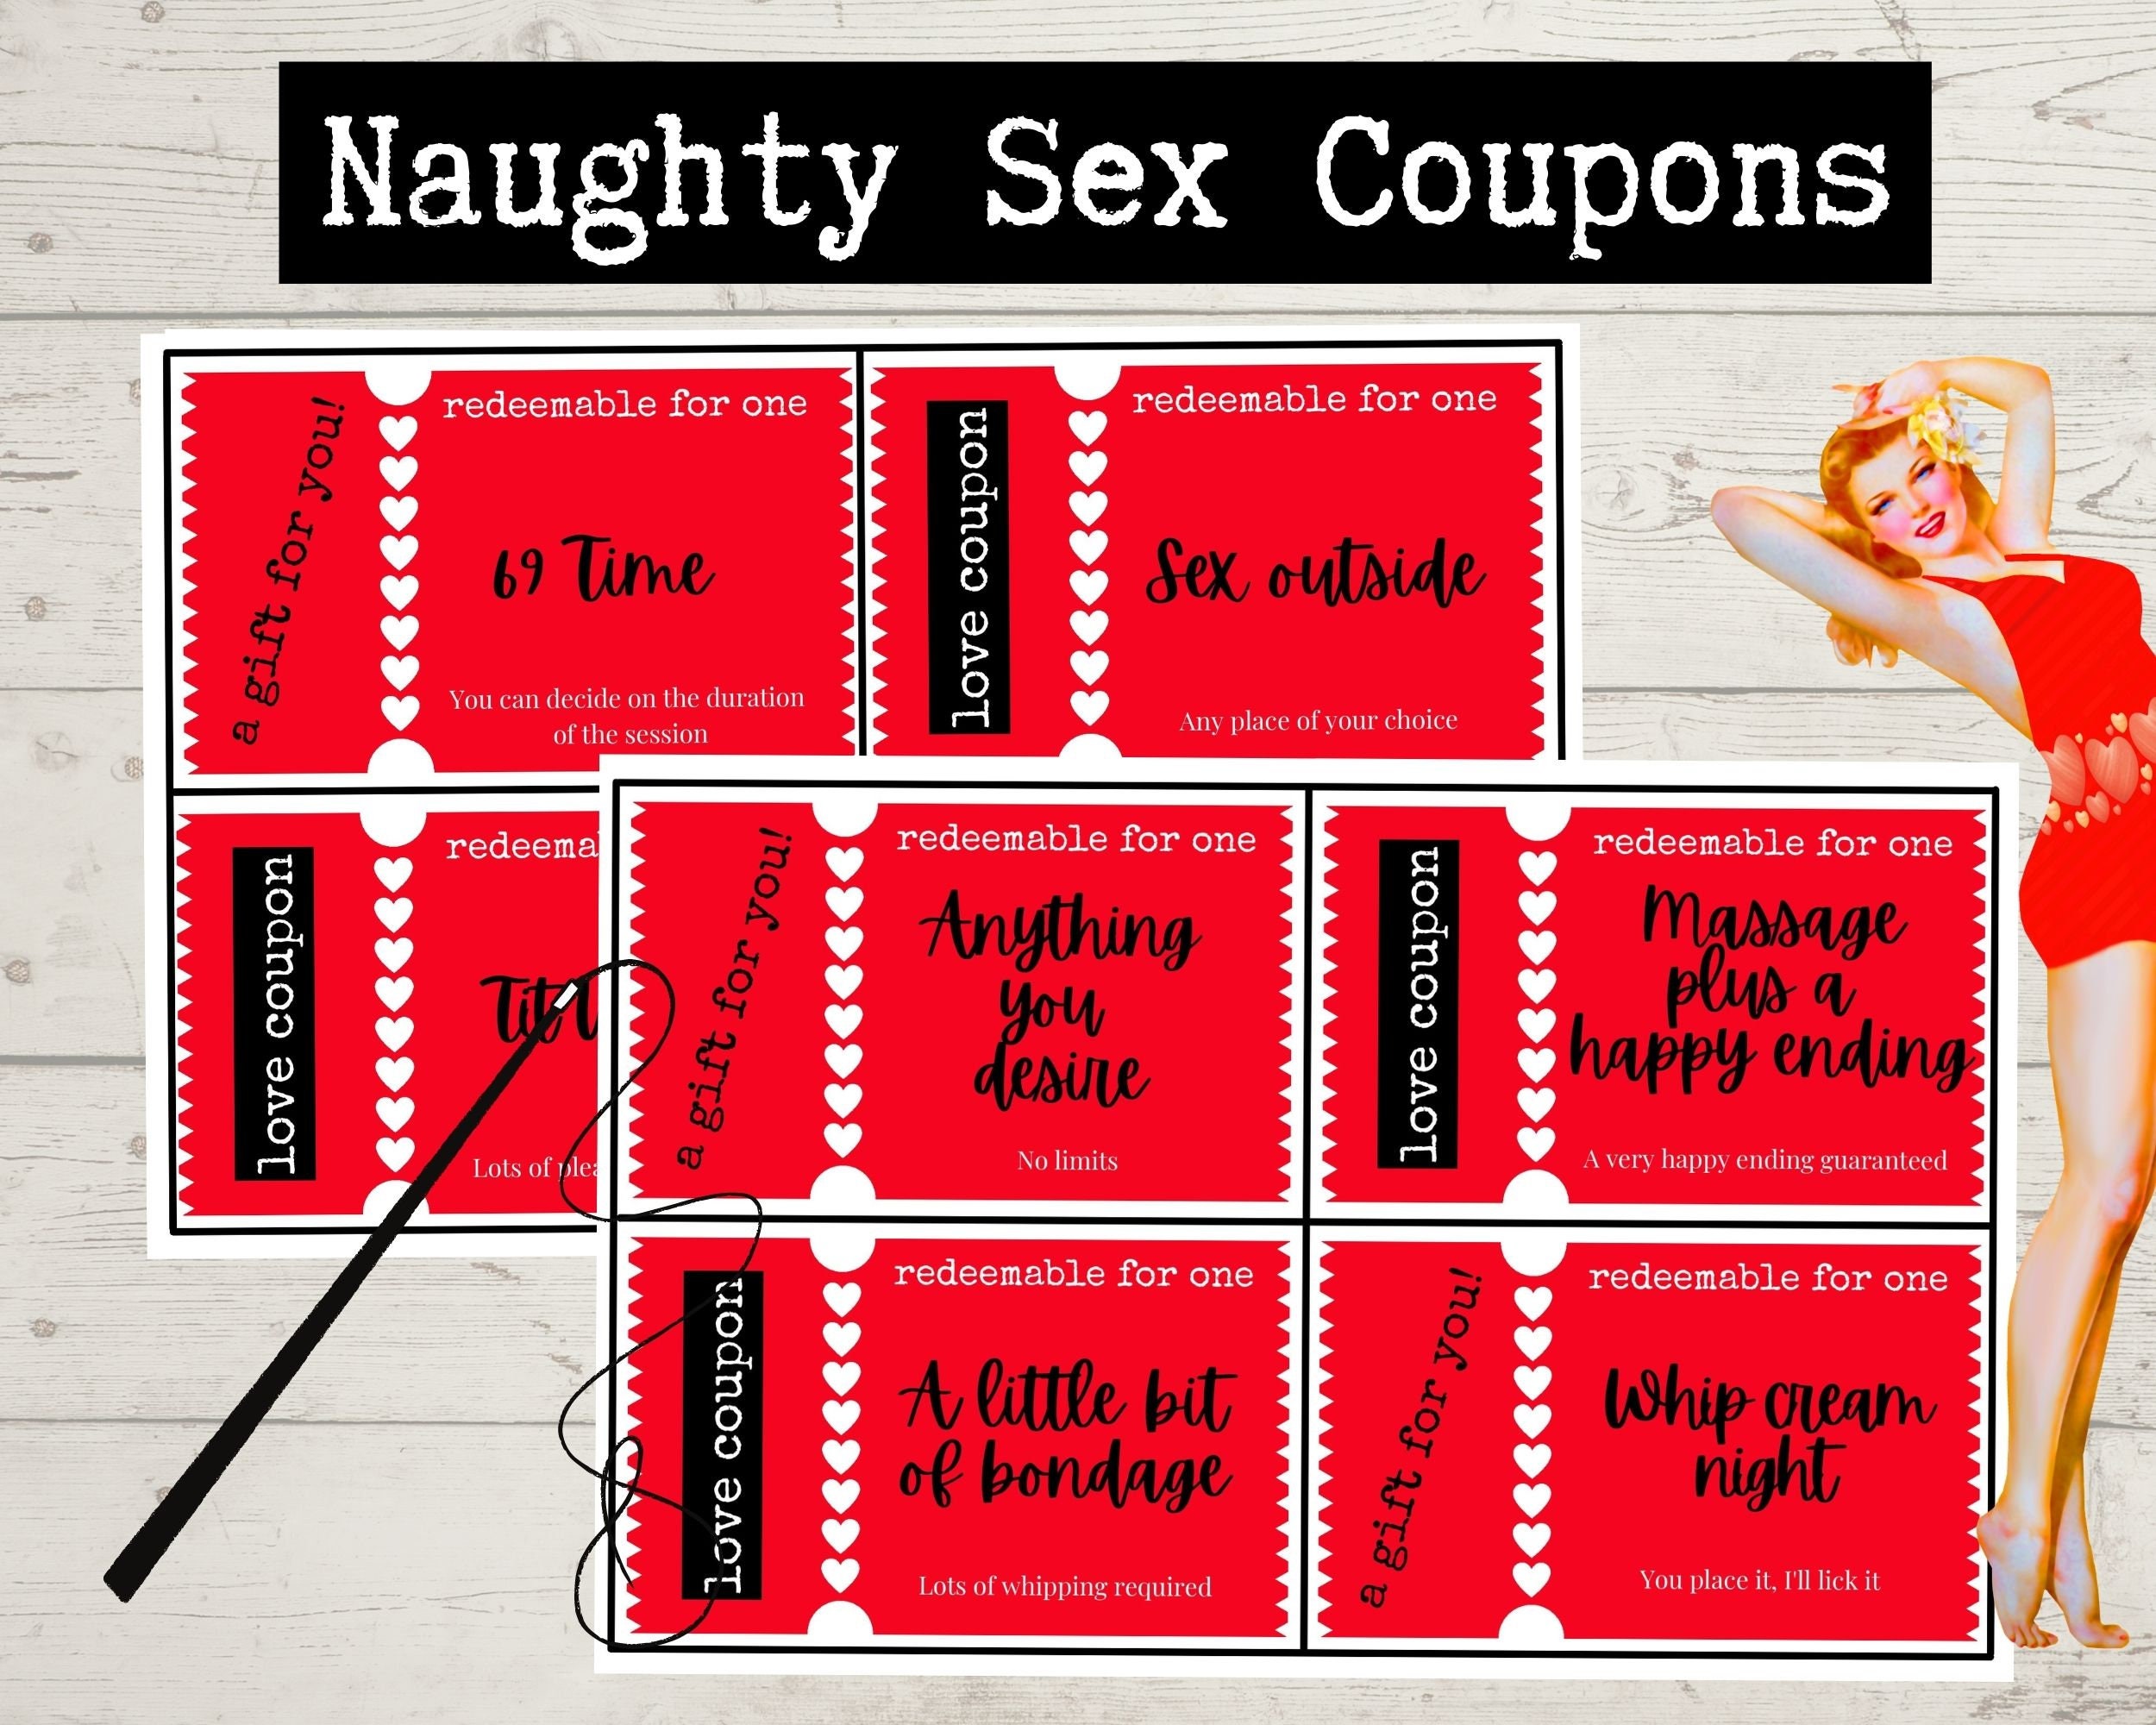 Naughty Sex Coupons Sexy Coupons Naughty Coupon Book hq picture